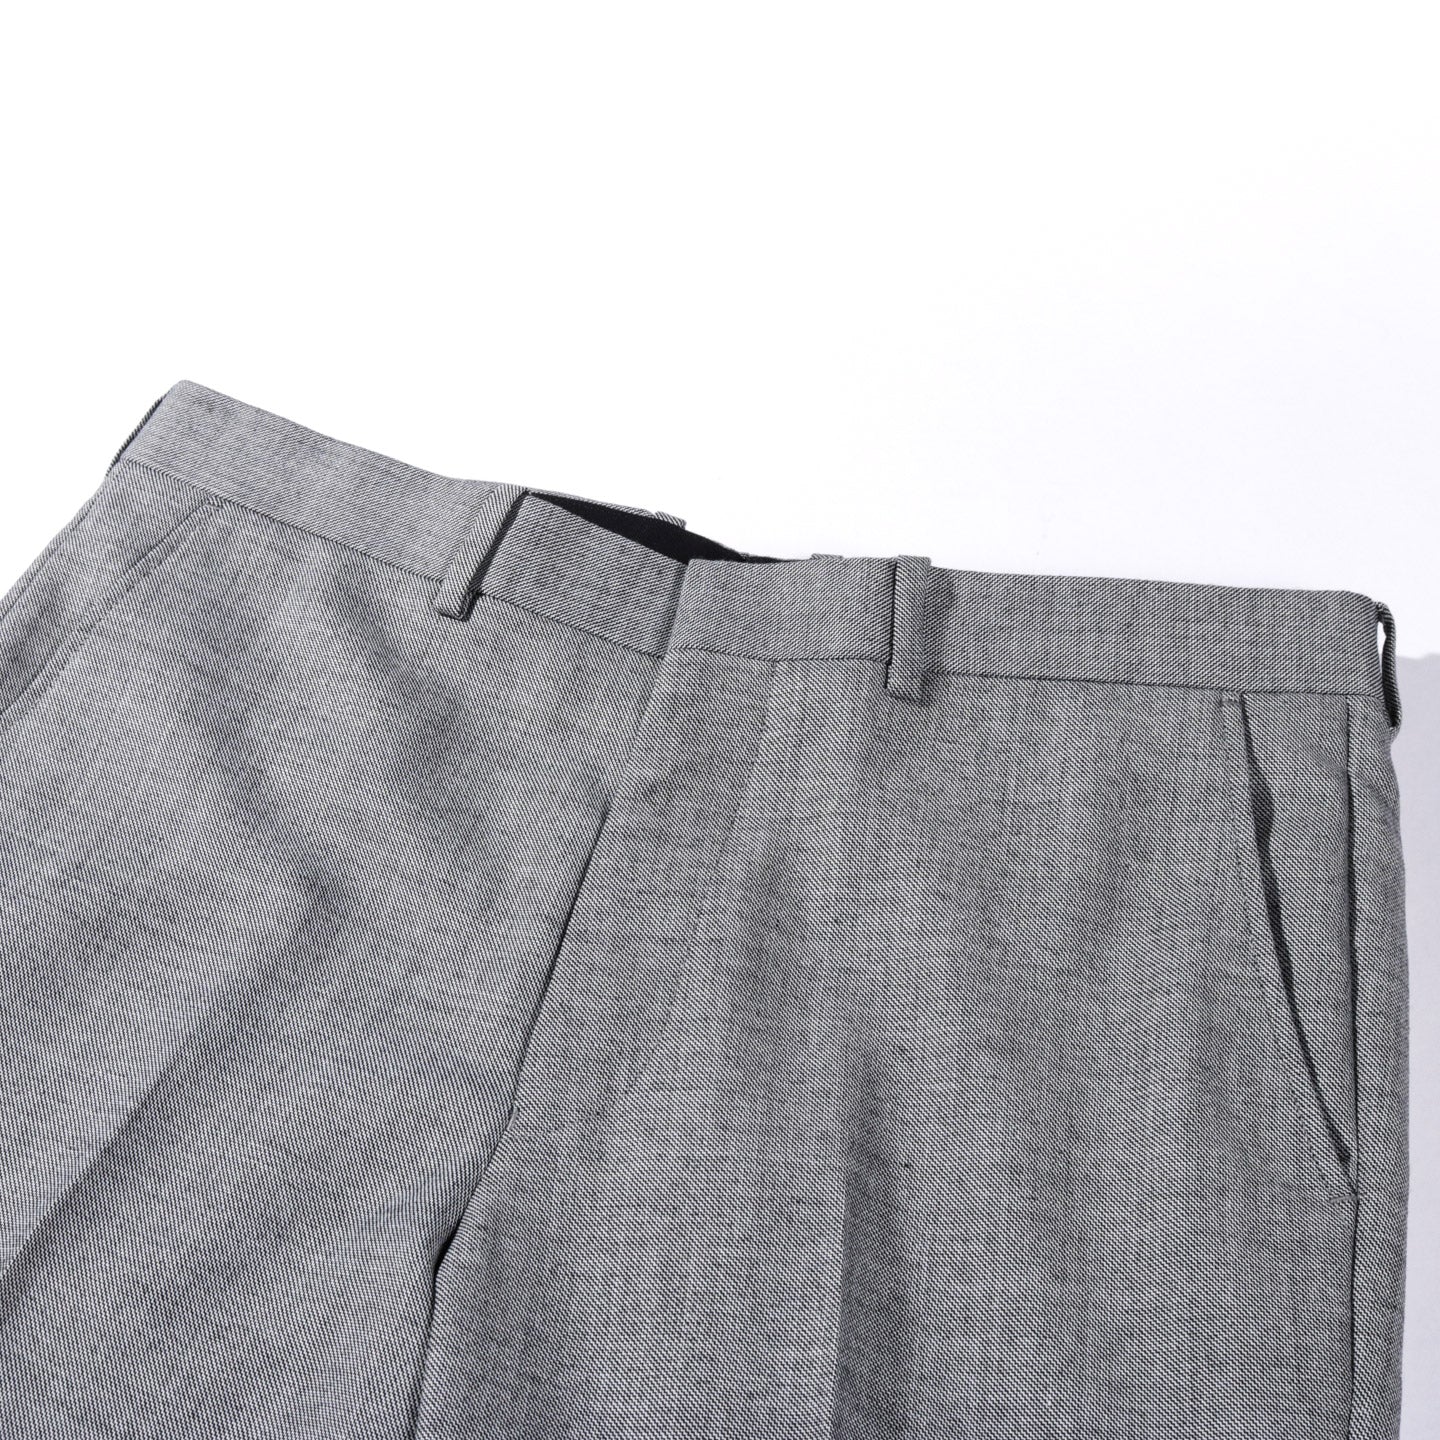 N.HOOLYWOOD  PT TAPERED SUIT PANTS GRAY   TODAY CLOTHING